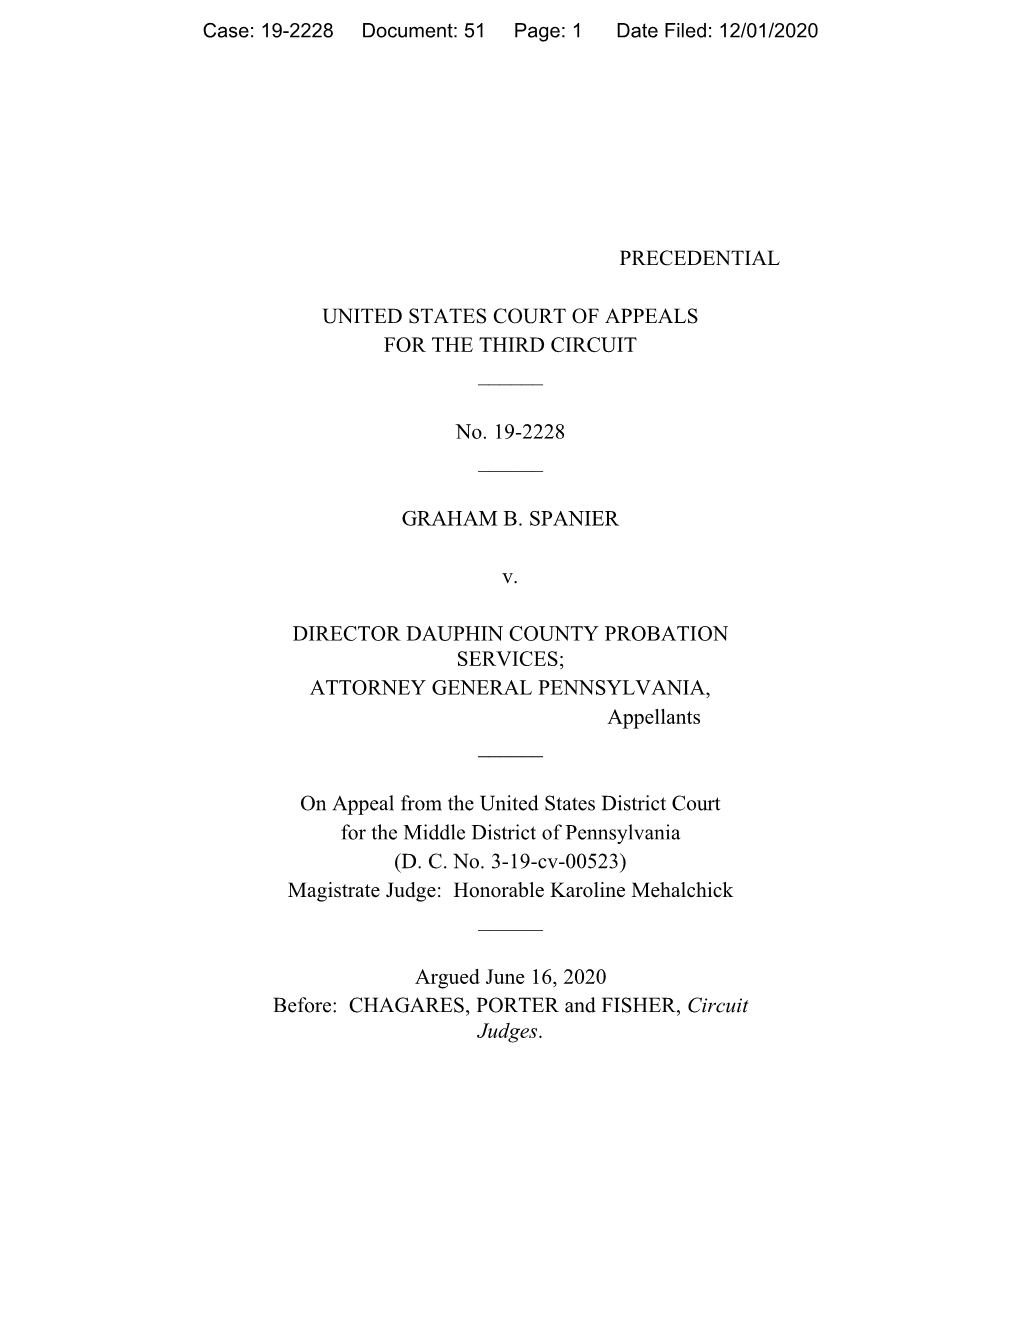 U.S. Court of Appeals for the Third Circuit